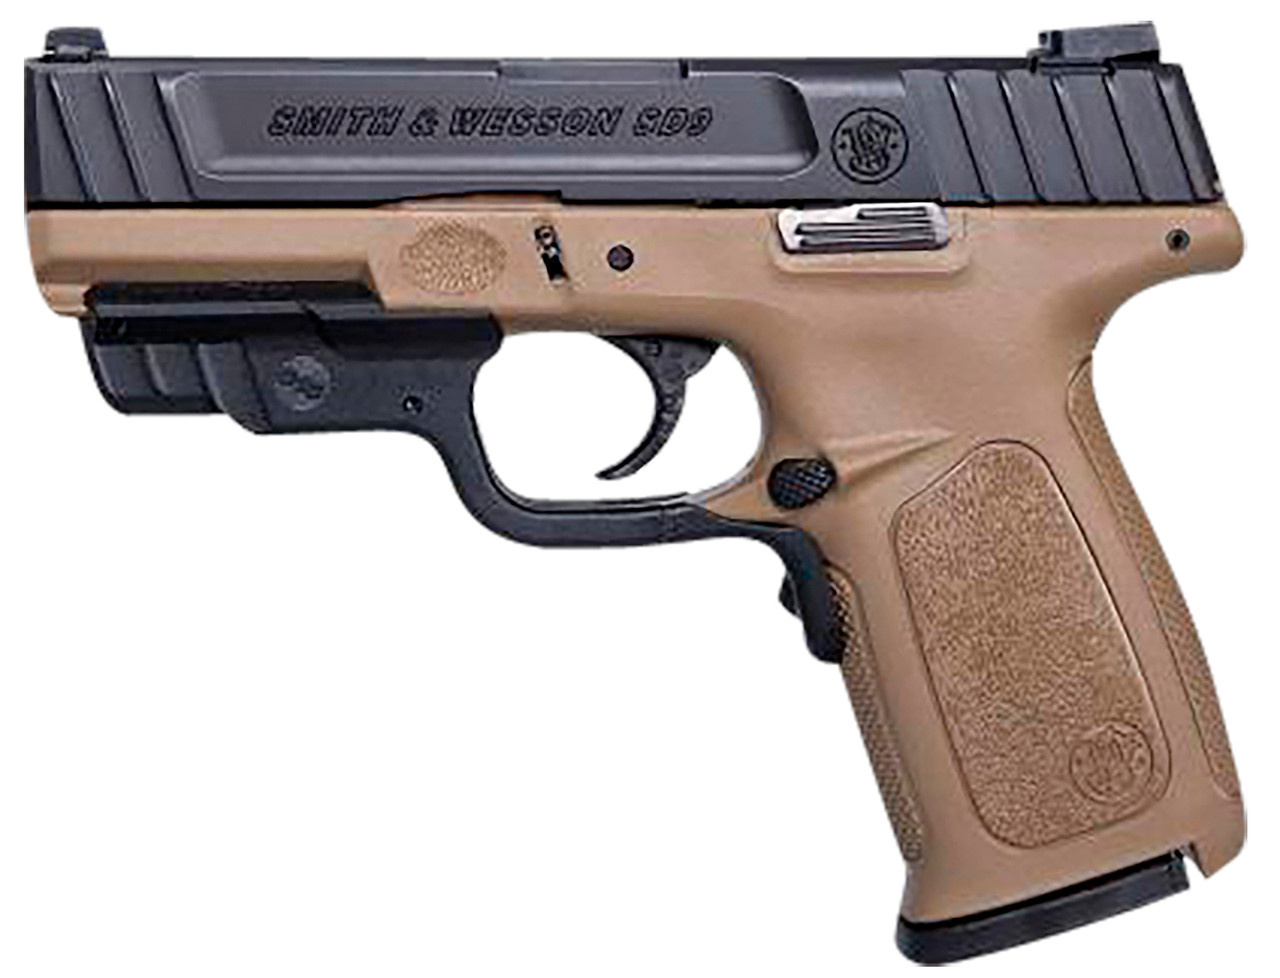 Smith & Wesson Smith & Wesson, SD9, 9mm, 4" bbl, FDE, with CT Laser